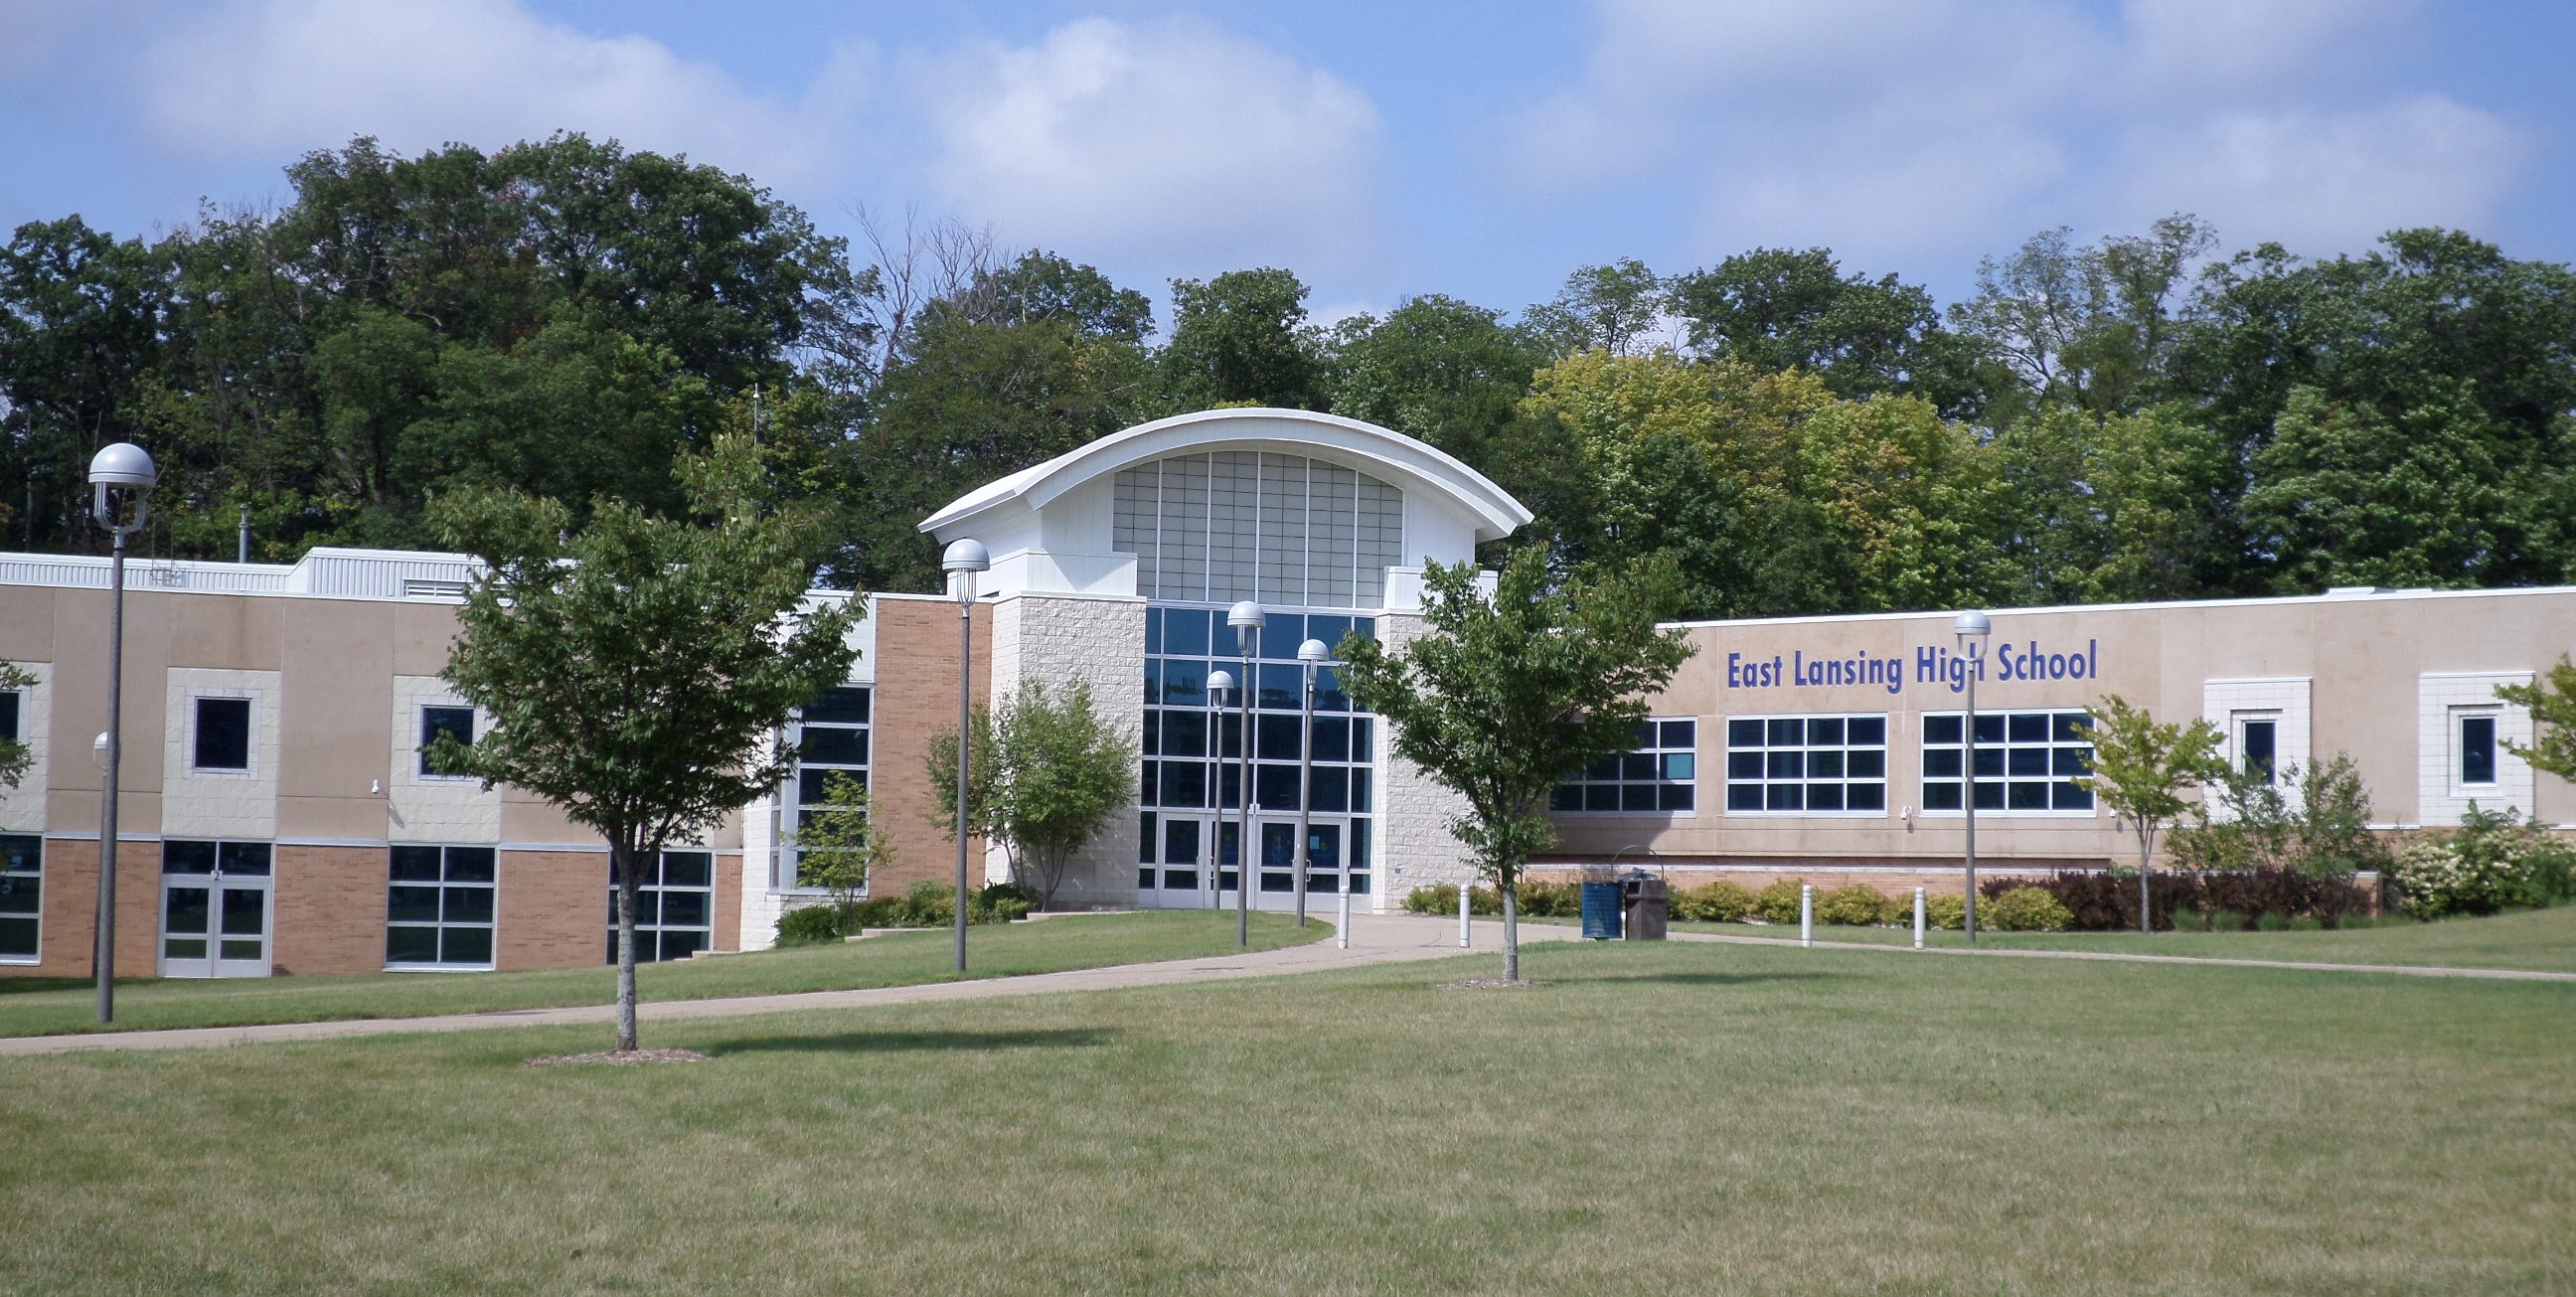 East Lansing High School - Photo by Kennethaw88 (CC BY 4.0)